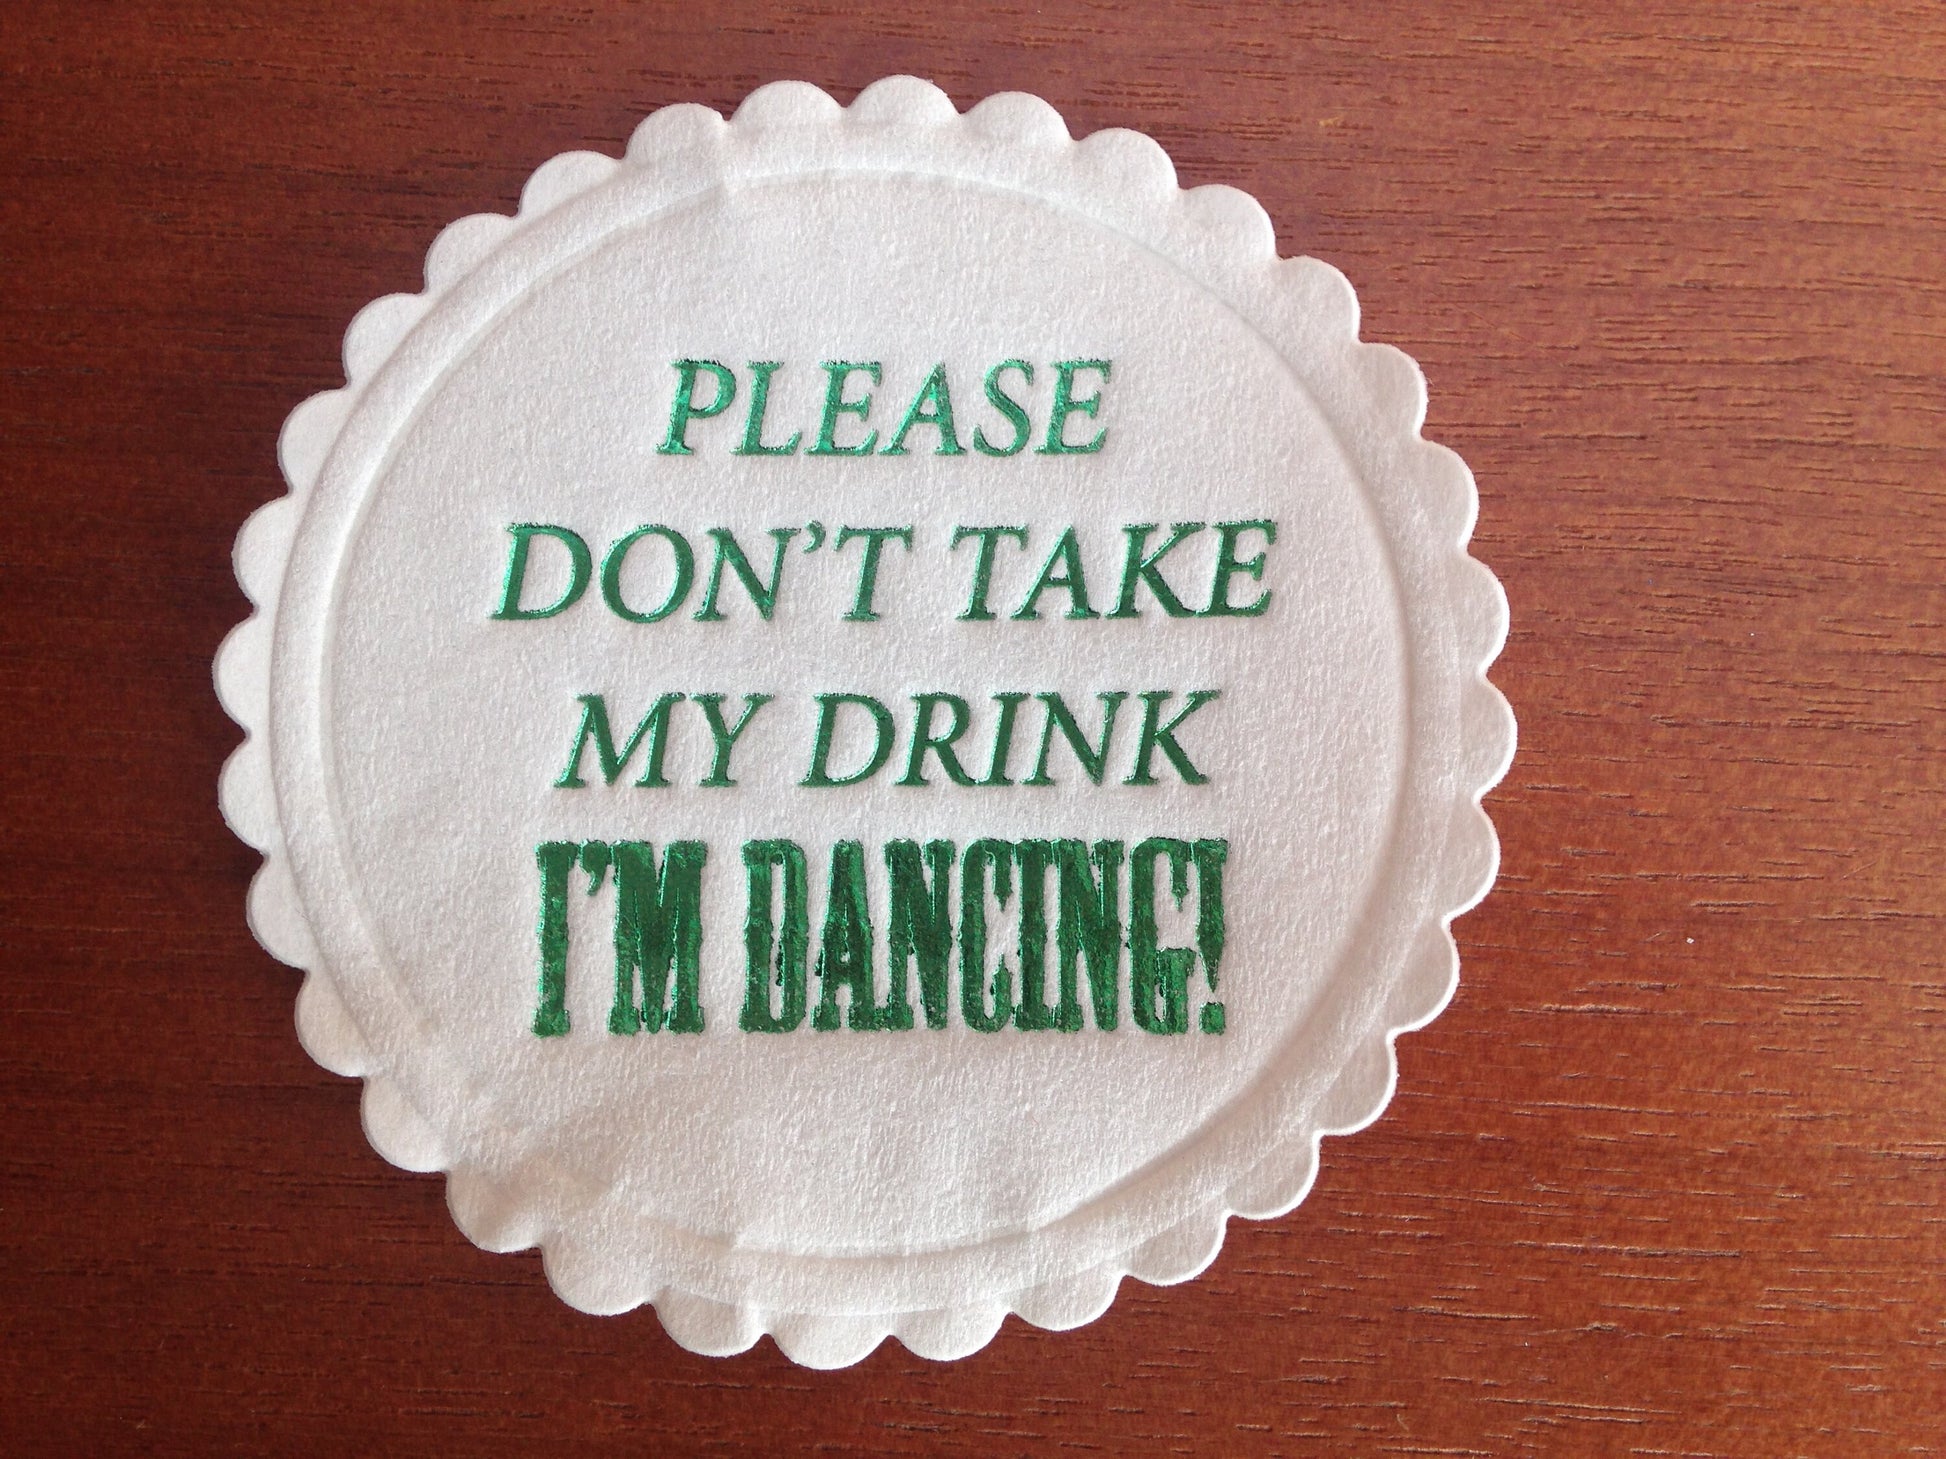 20 x Please Don't Take My Drink I'm Dancing Multi ply paper drinks coasters. Party, Celebration, Dancing